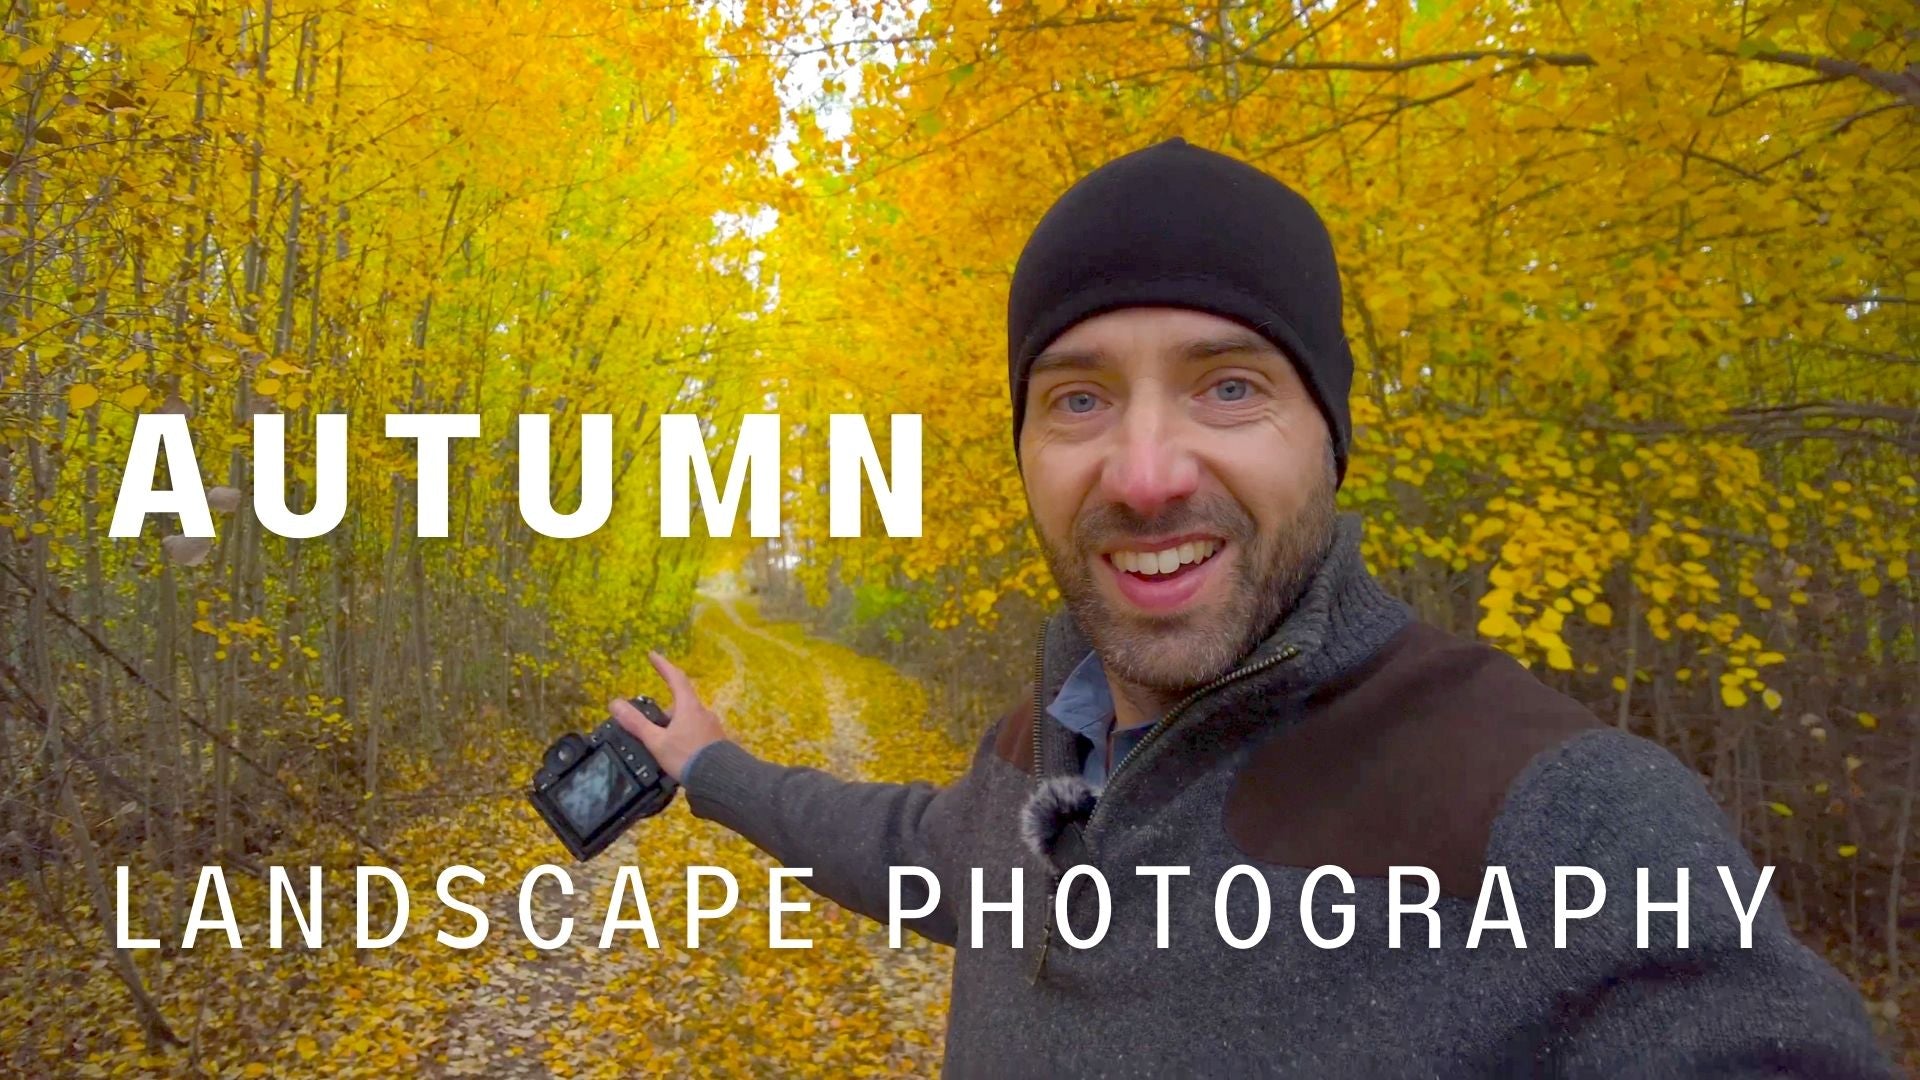 How to Photograph Autumn (or Fall) Landscapes by New Zealand's Best Award Winning Landscape Photographer Artist Stephen Milner